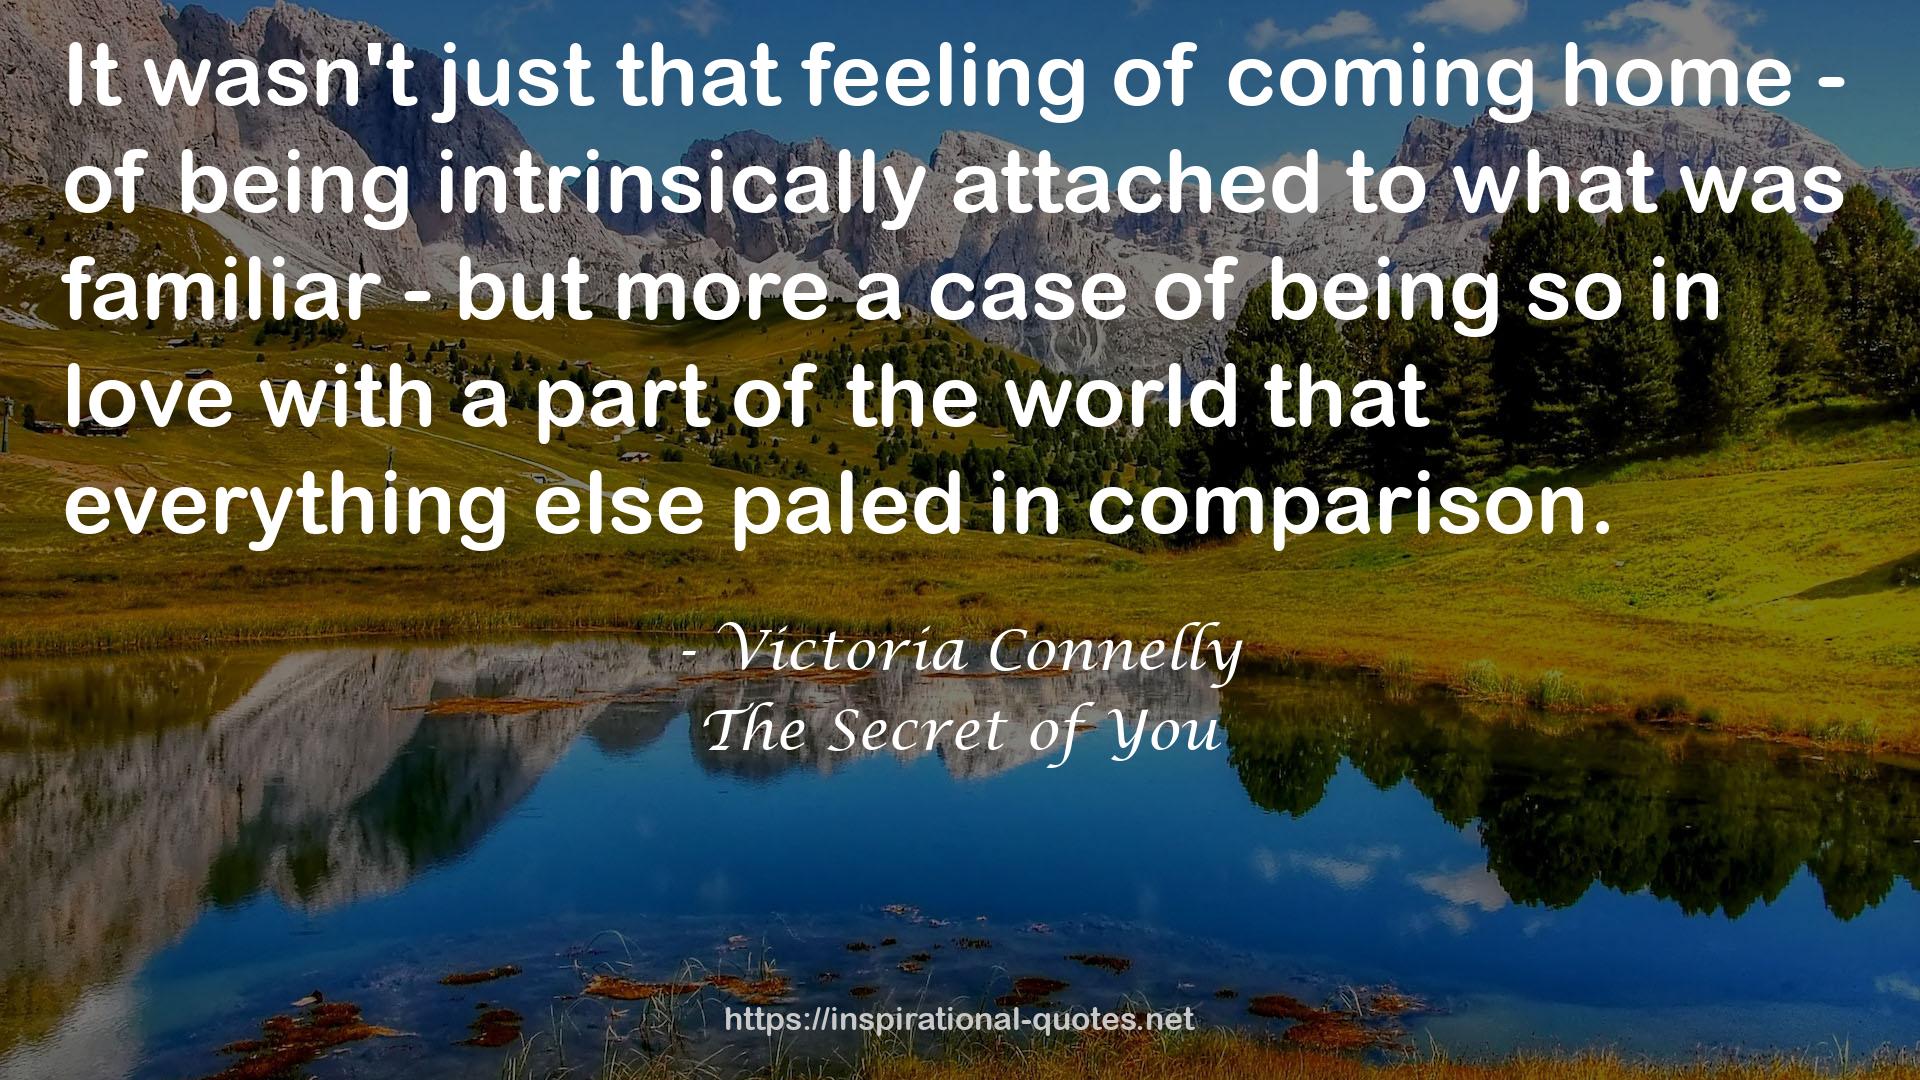 Victoria Connelly QUOTES